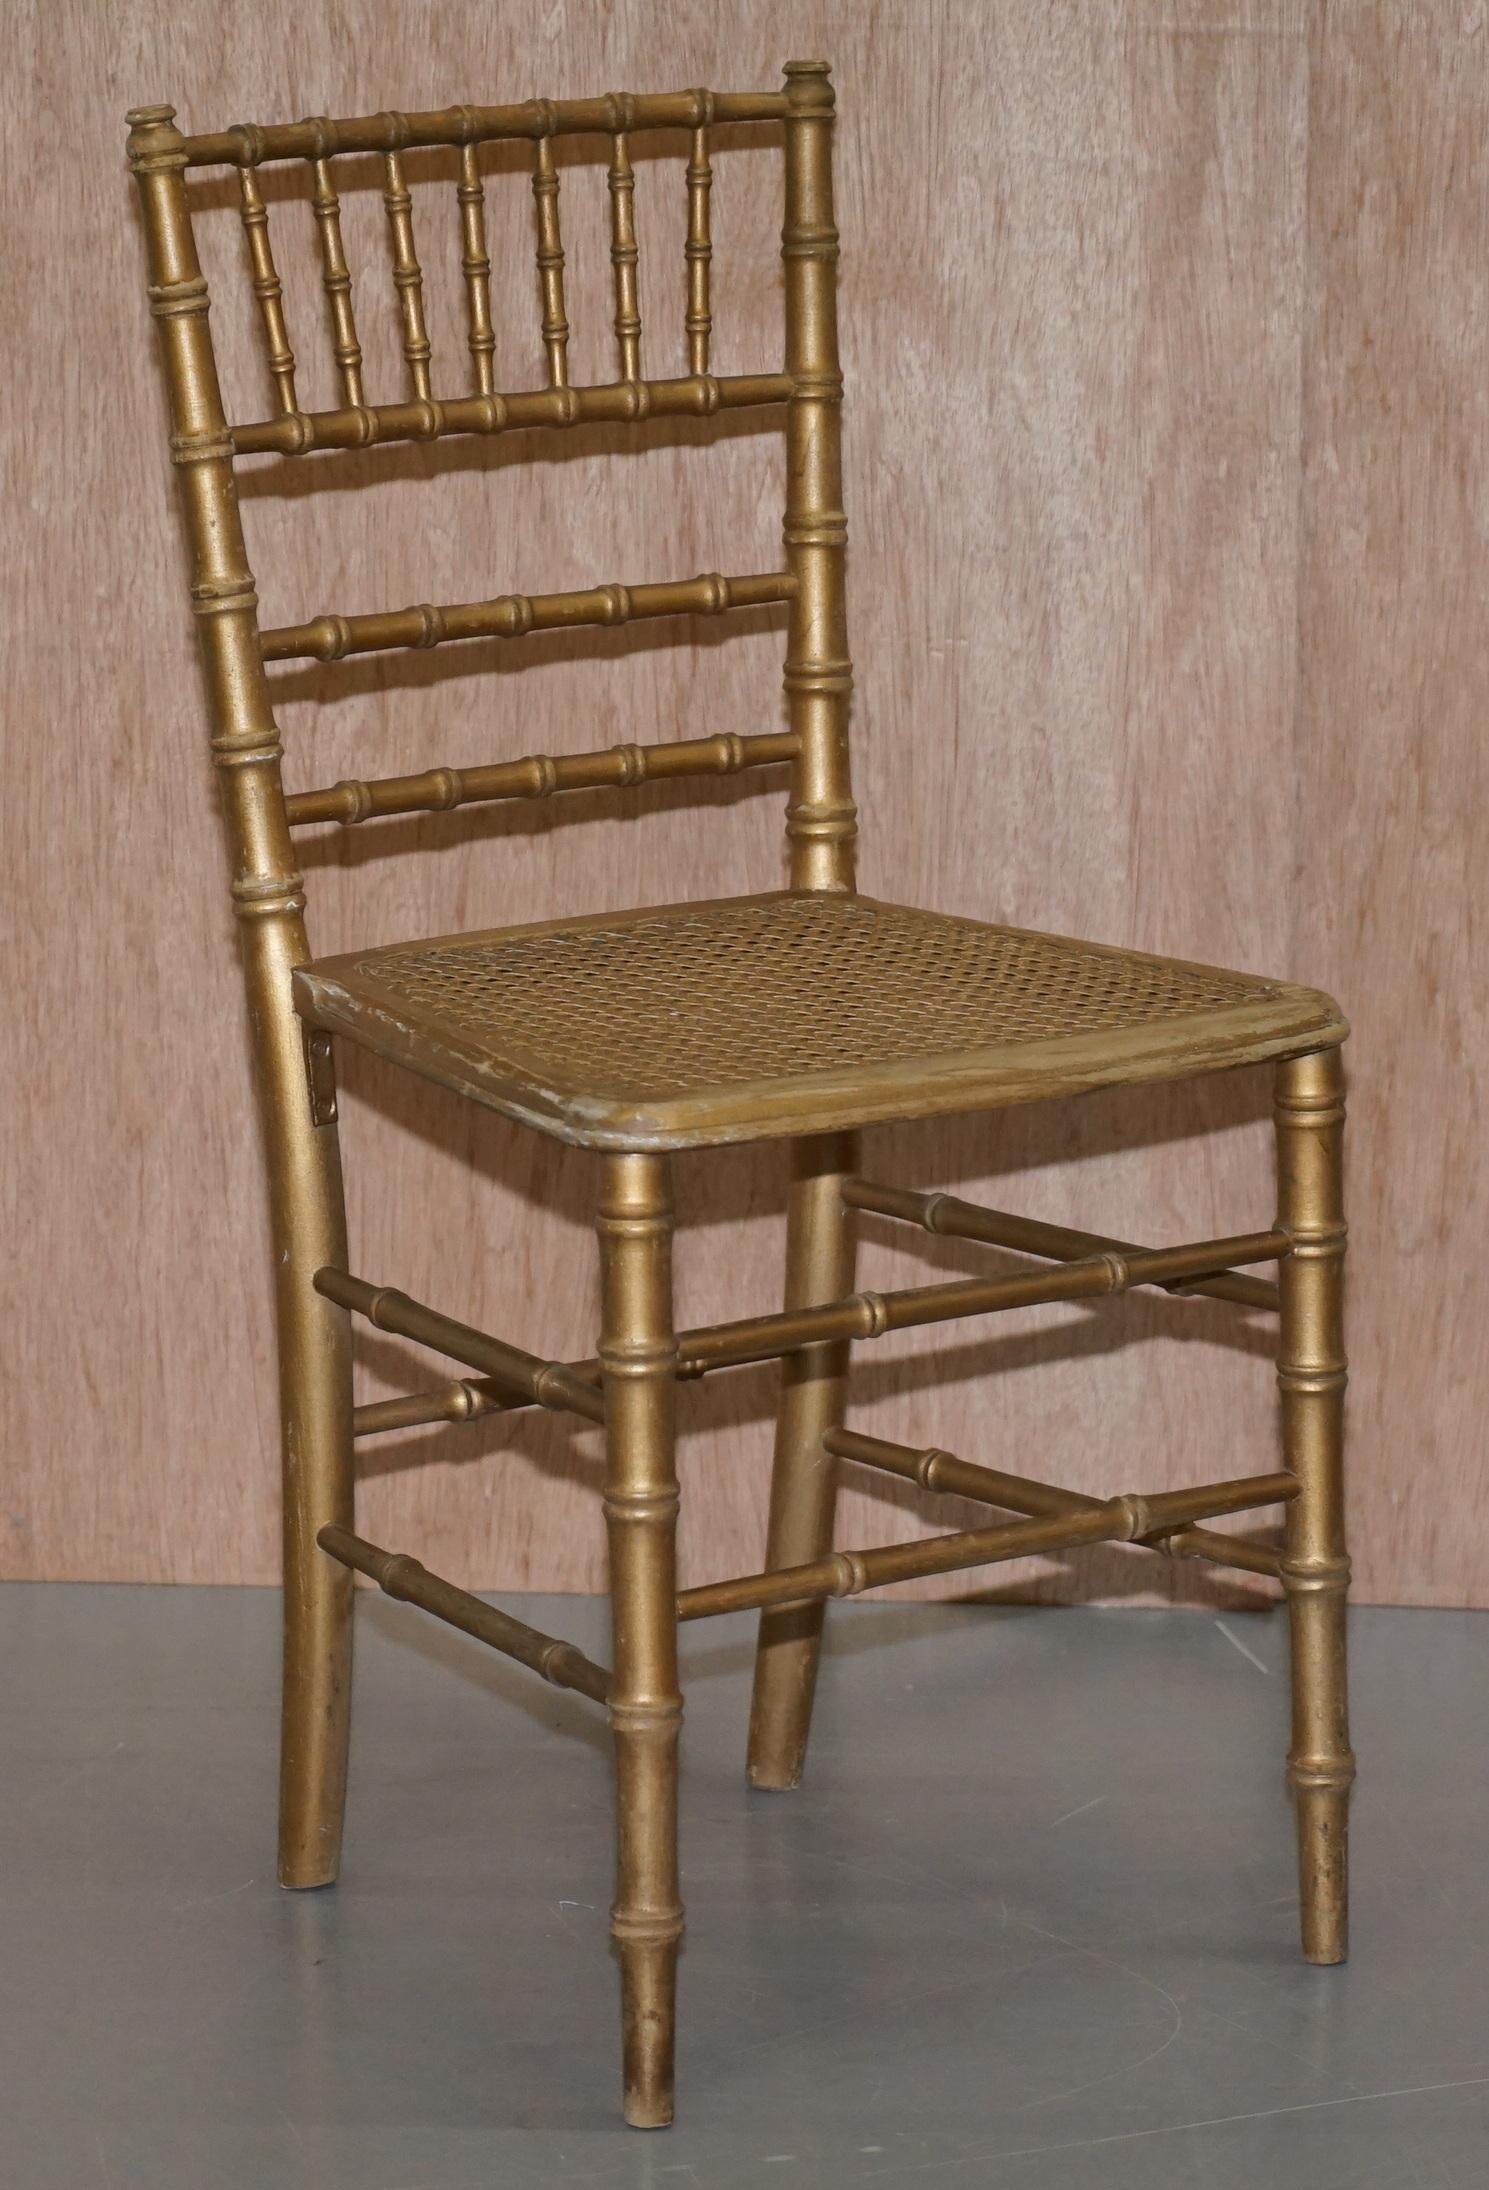 We are delighted to offer for sale this lovely original Regency style giltwood famboo chair

I have a matching pair of this exact model listed under my other items and then this single one. I also have a pair of later Regency chairs with the